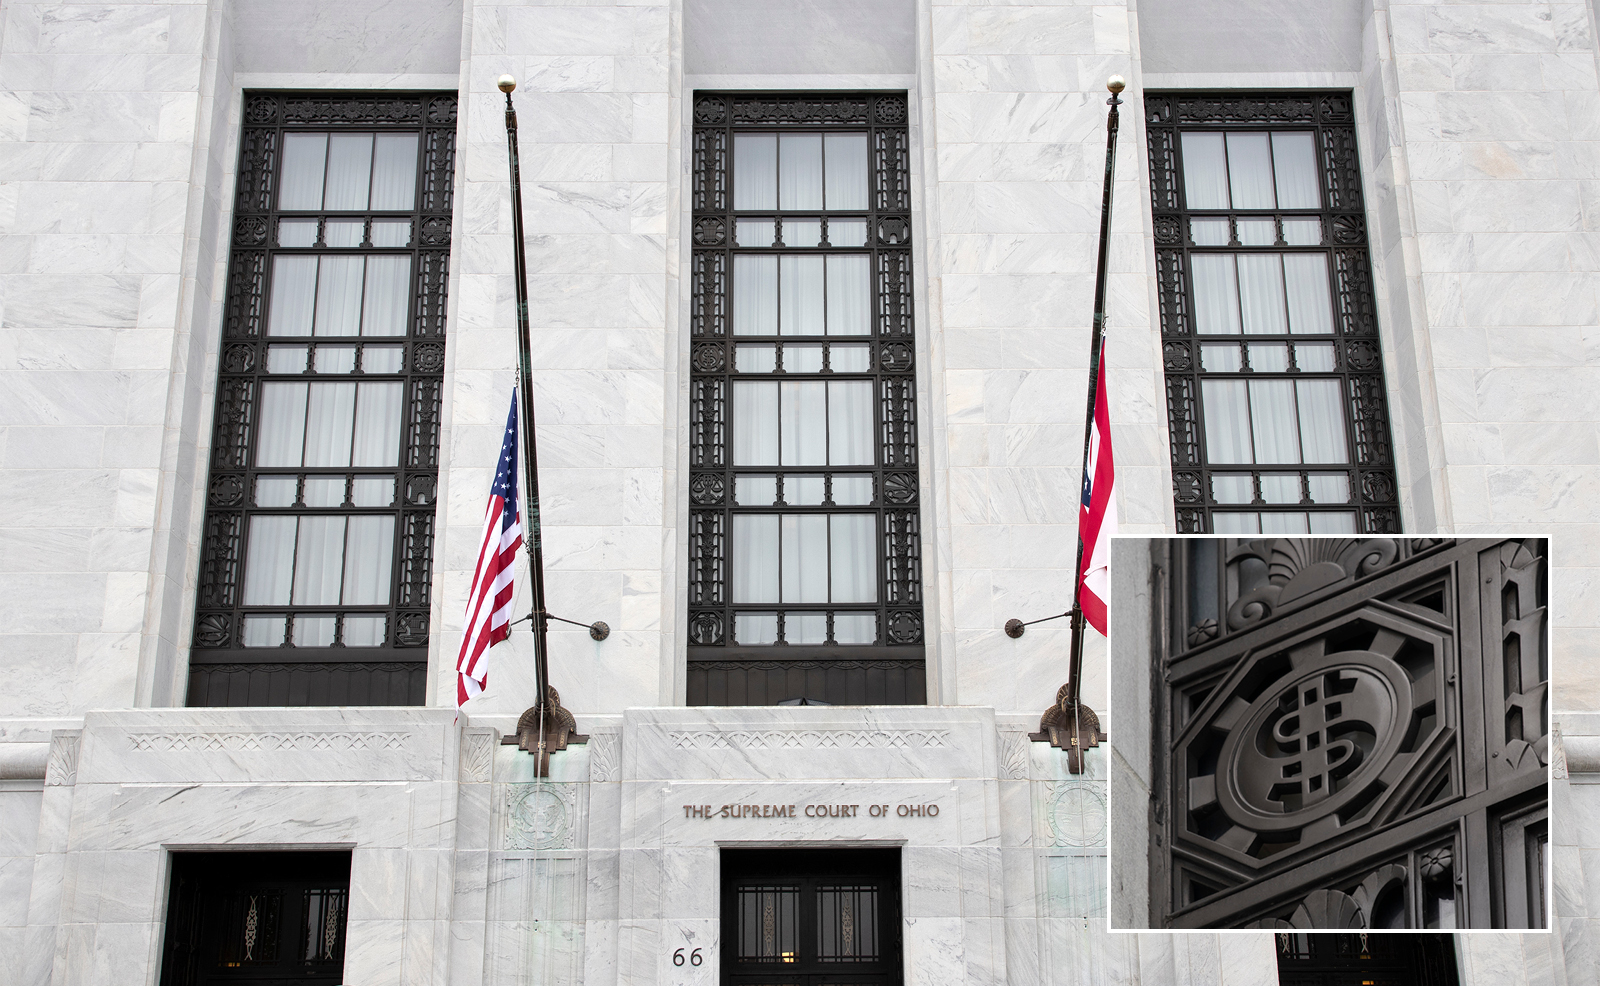 Image of the west side of the Thomas J. Moyer Ohio Judicial Center showing three large windows surrounded by intricate metal grill work and the United States and Ohio flags